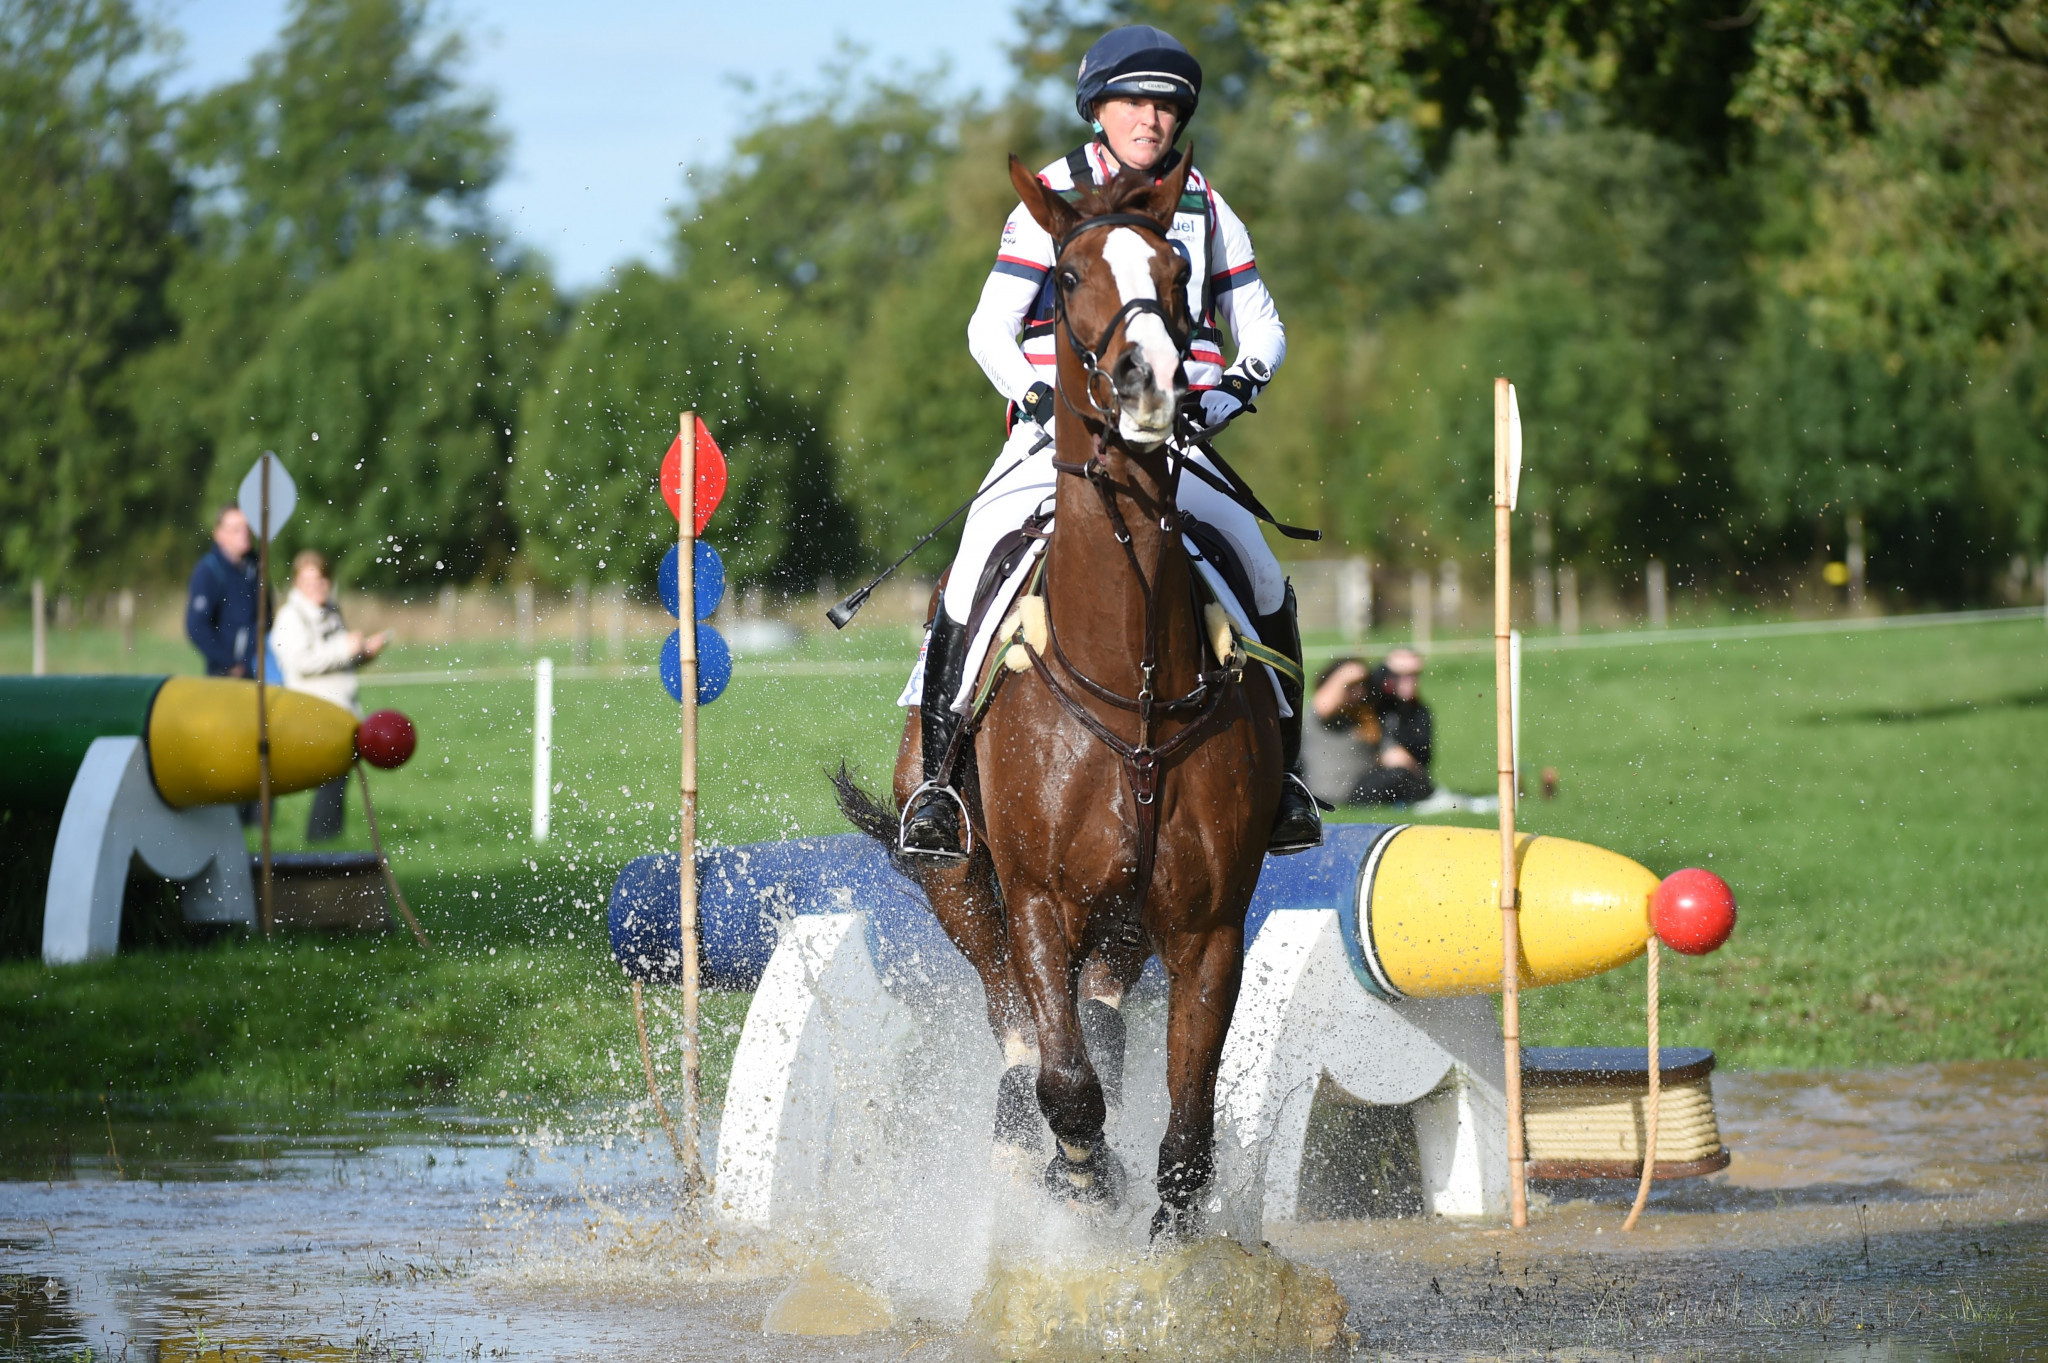 Britain's Georgina French competes in a cross-country event in Le Lion d'Angers in France last year ©Getty Images